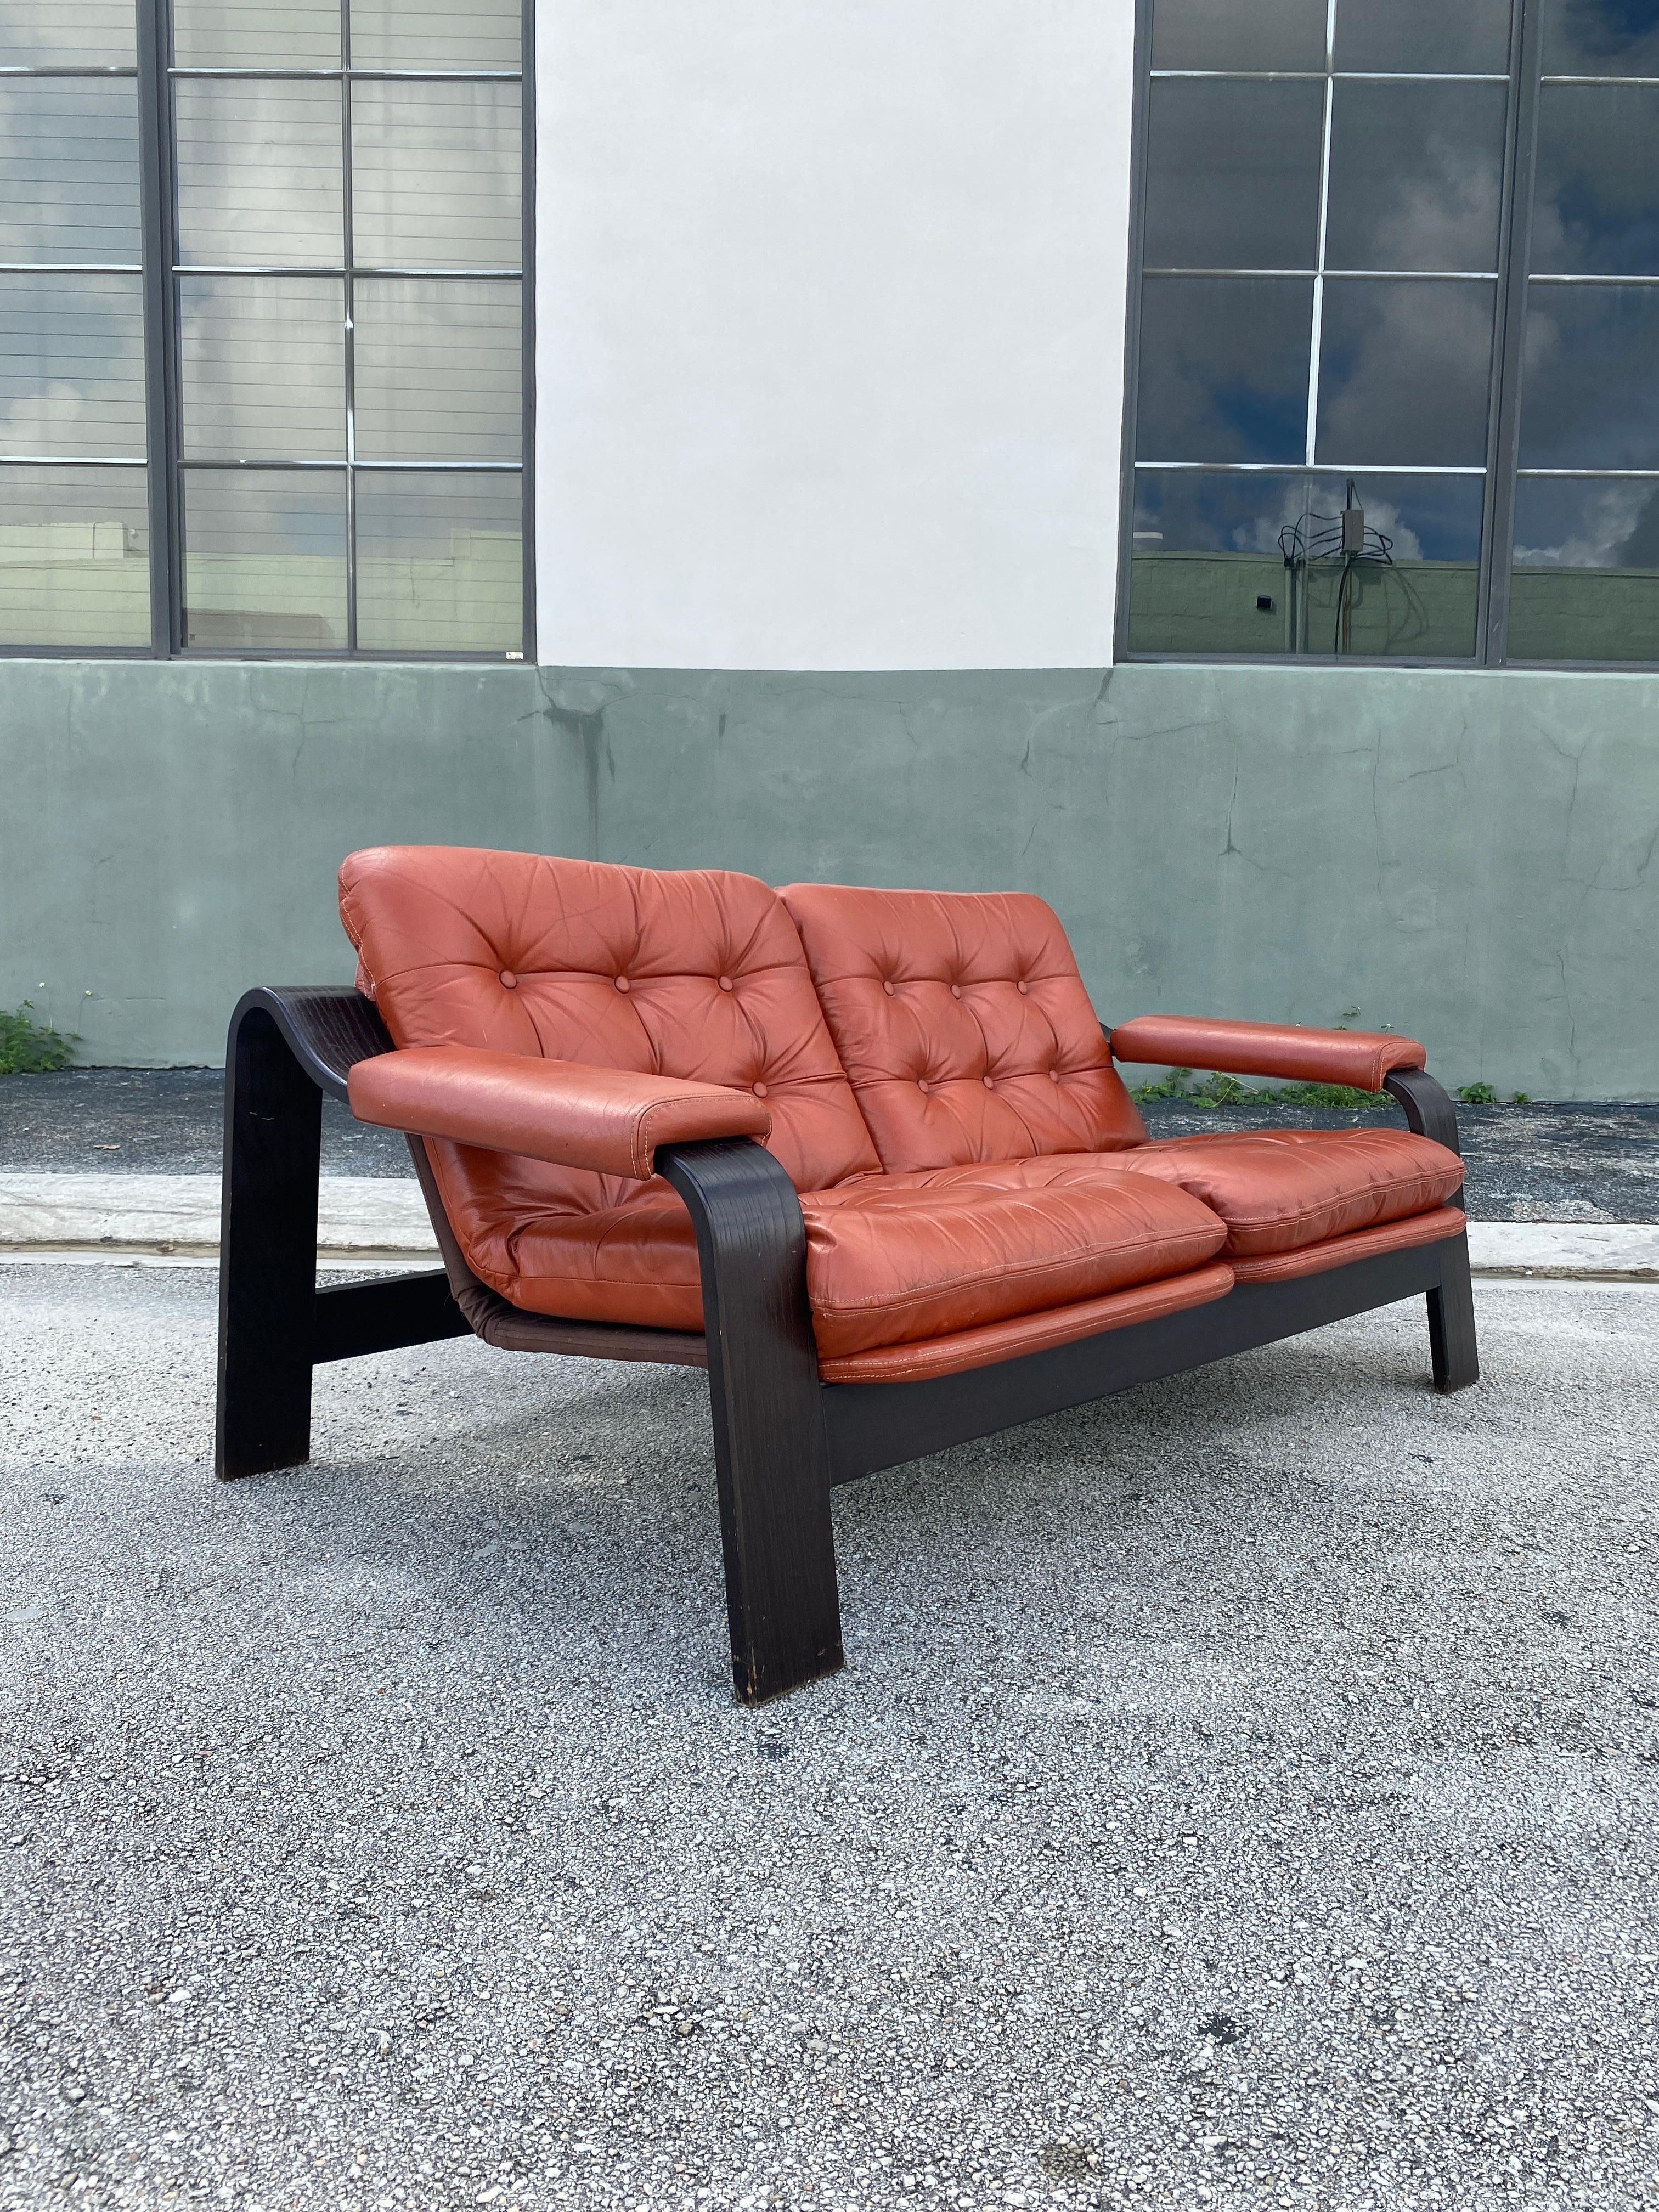 Vintage lounge chair with original burnt orange leather sitting over brown canvas slings, bentwood frame finished in black walnut stain. Circa 1970s.

Measures: 57”W x 36”D x 25”H x 14”seat H x 19”arm H